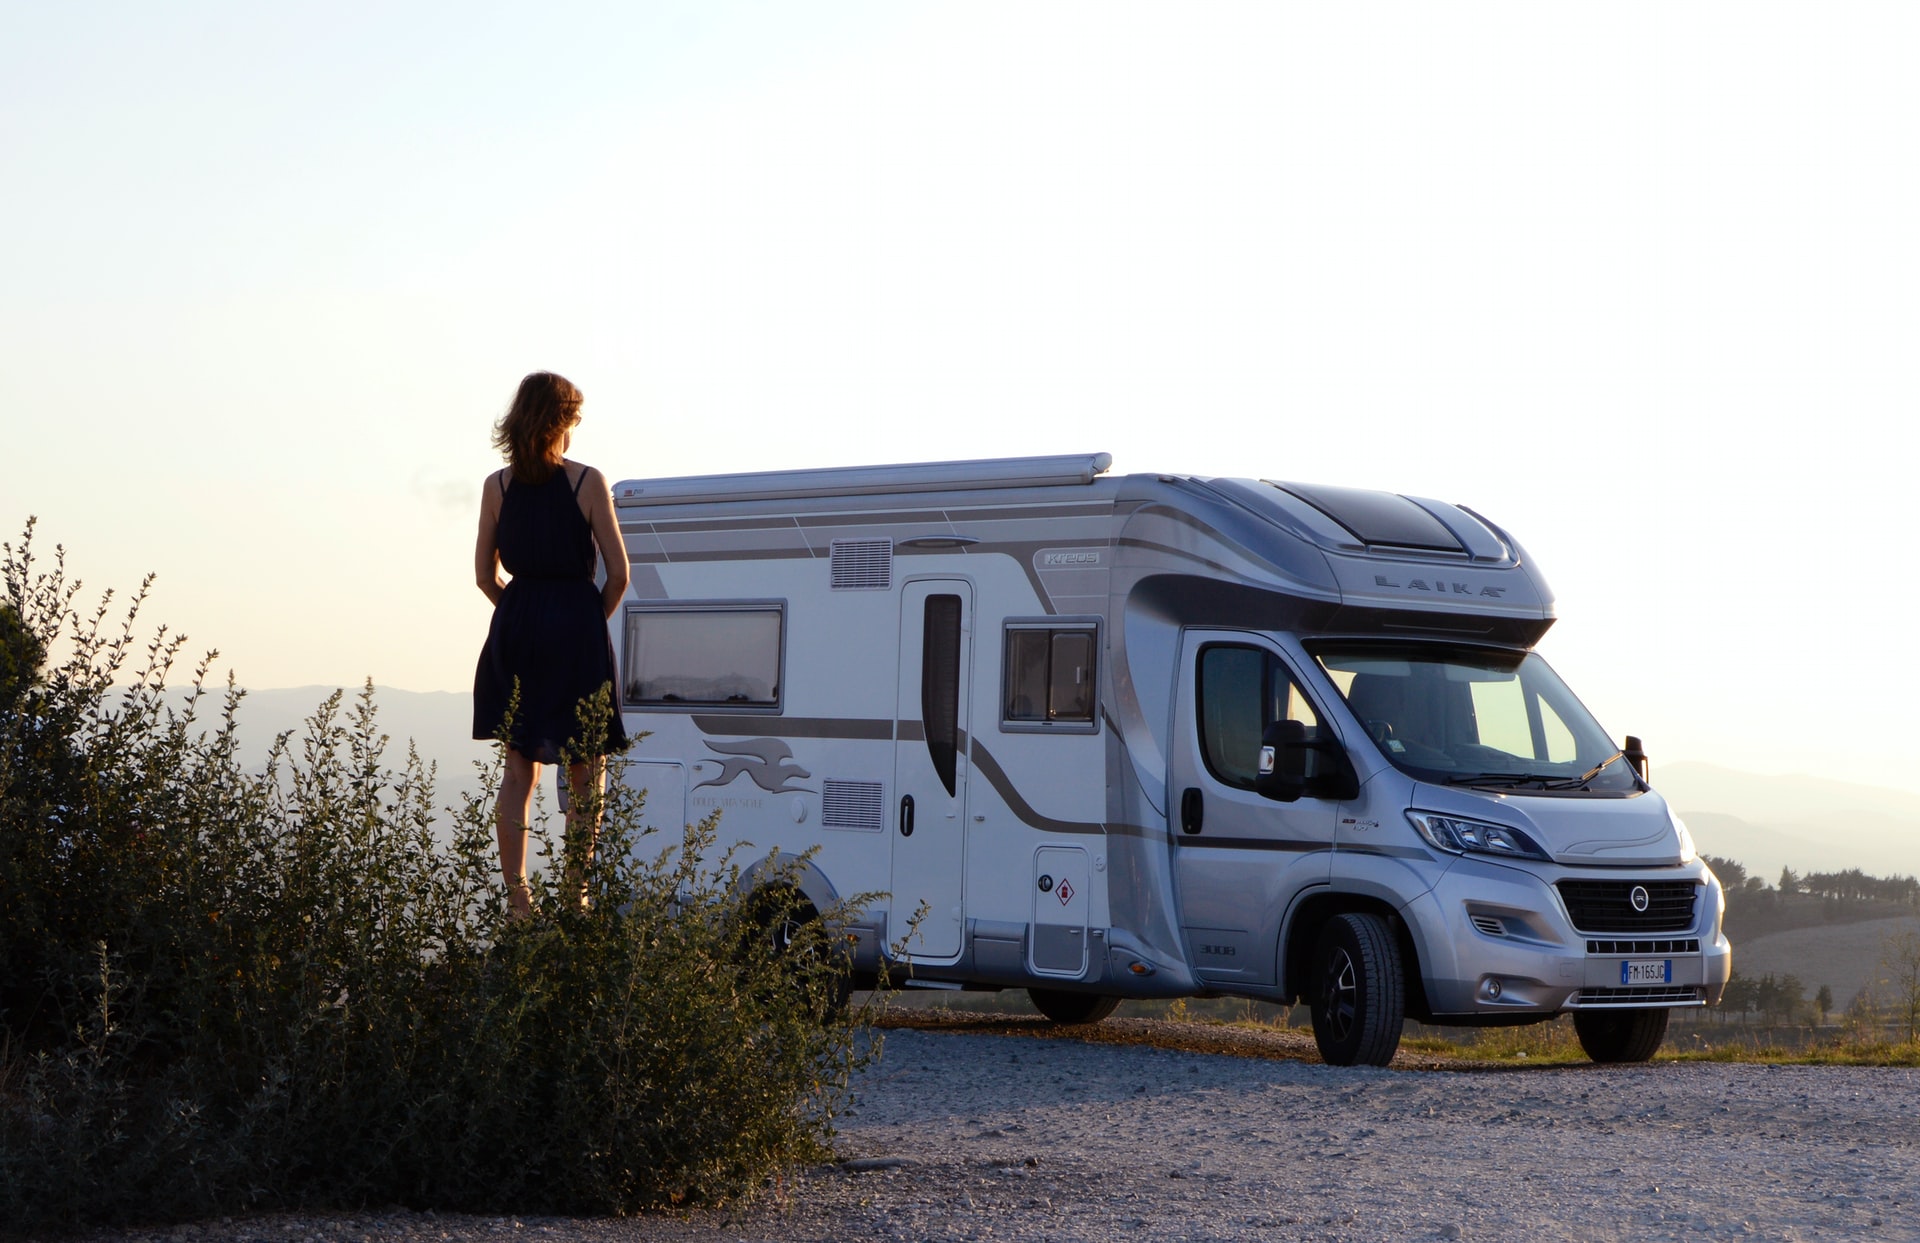 Where are campervans allowed to park overnight?